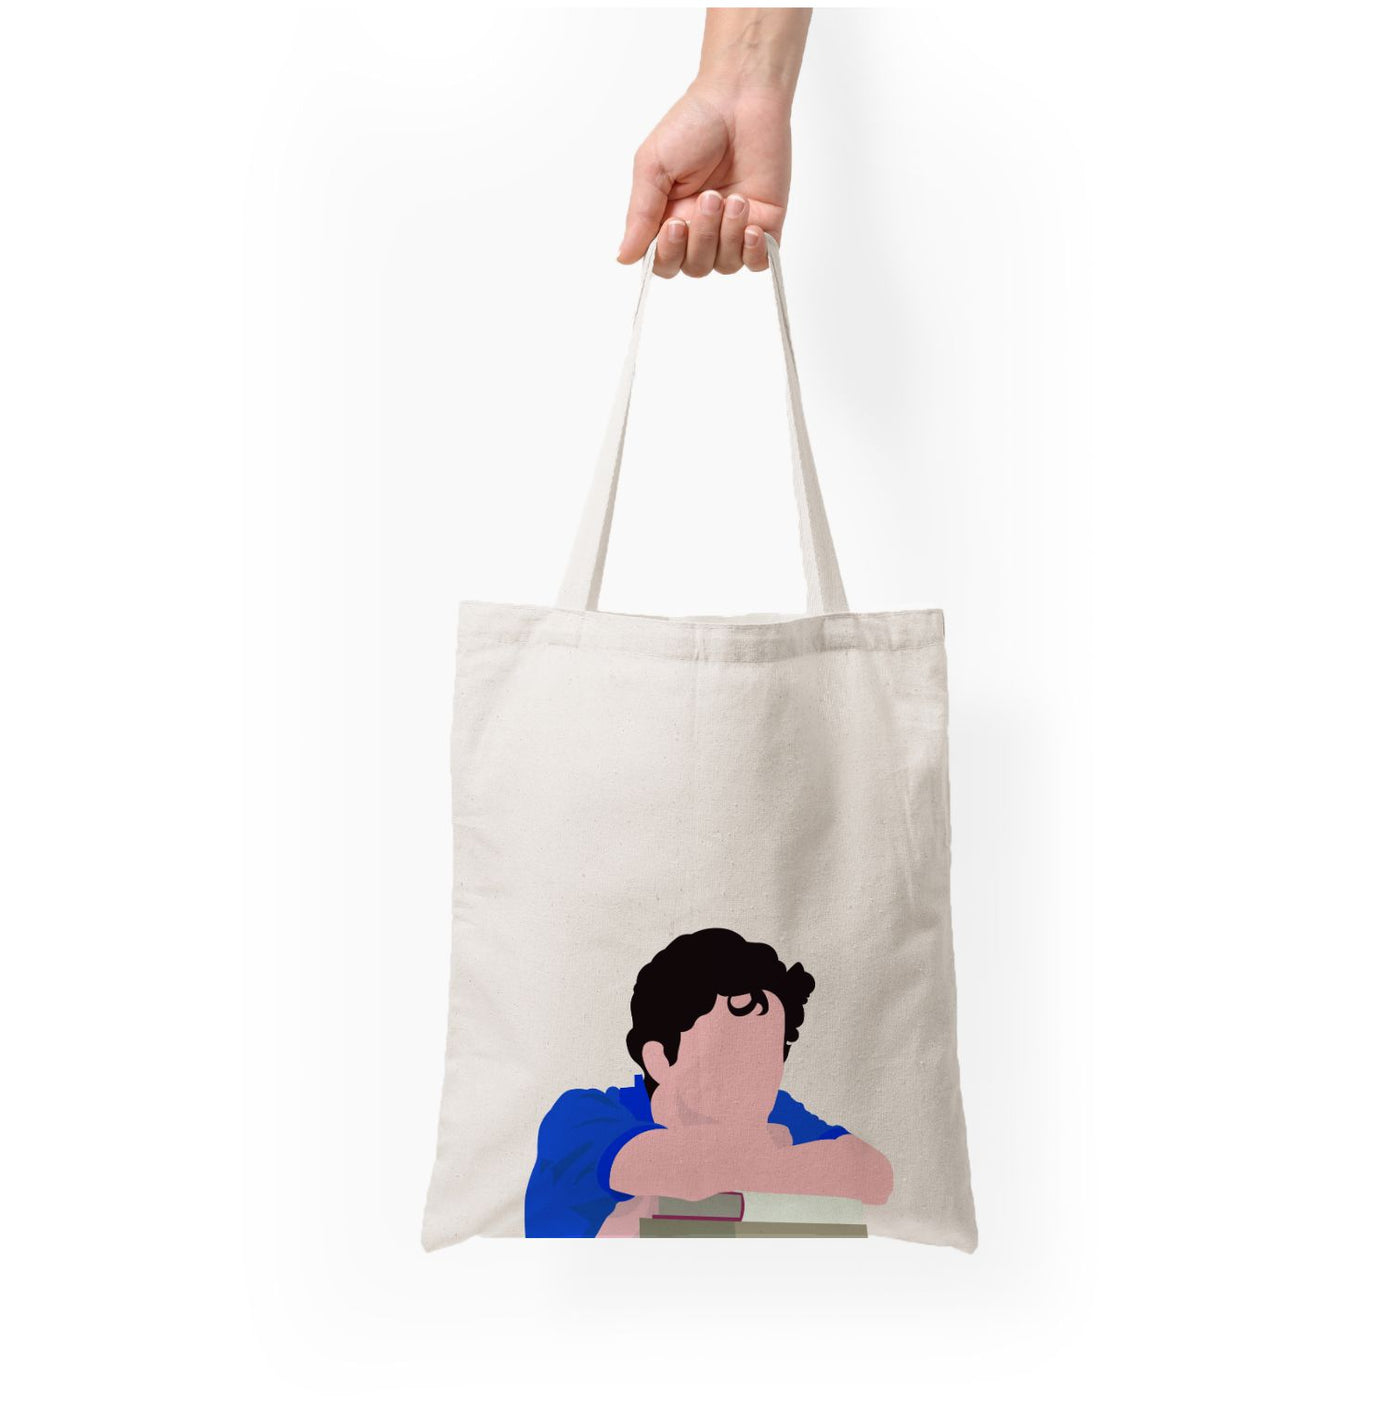 Call Me By Your Name - Timothée Chalamet Tote Bag